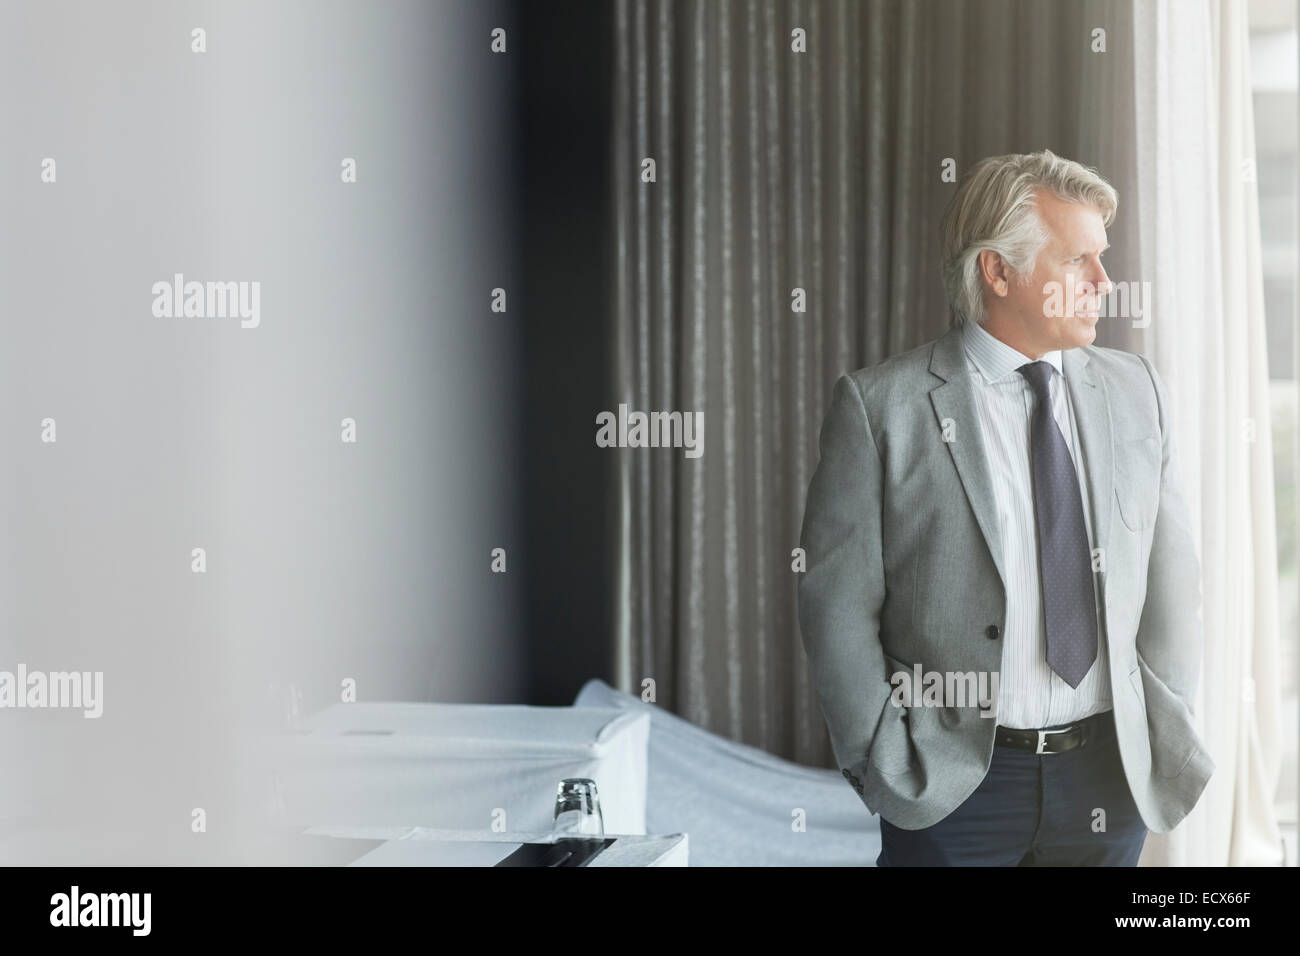 Portrait of businessman with hands in pockets standing in conference room, looking out of window Stock Photo